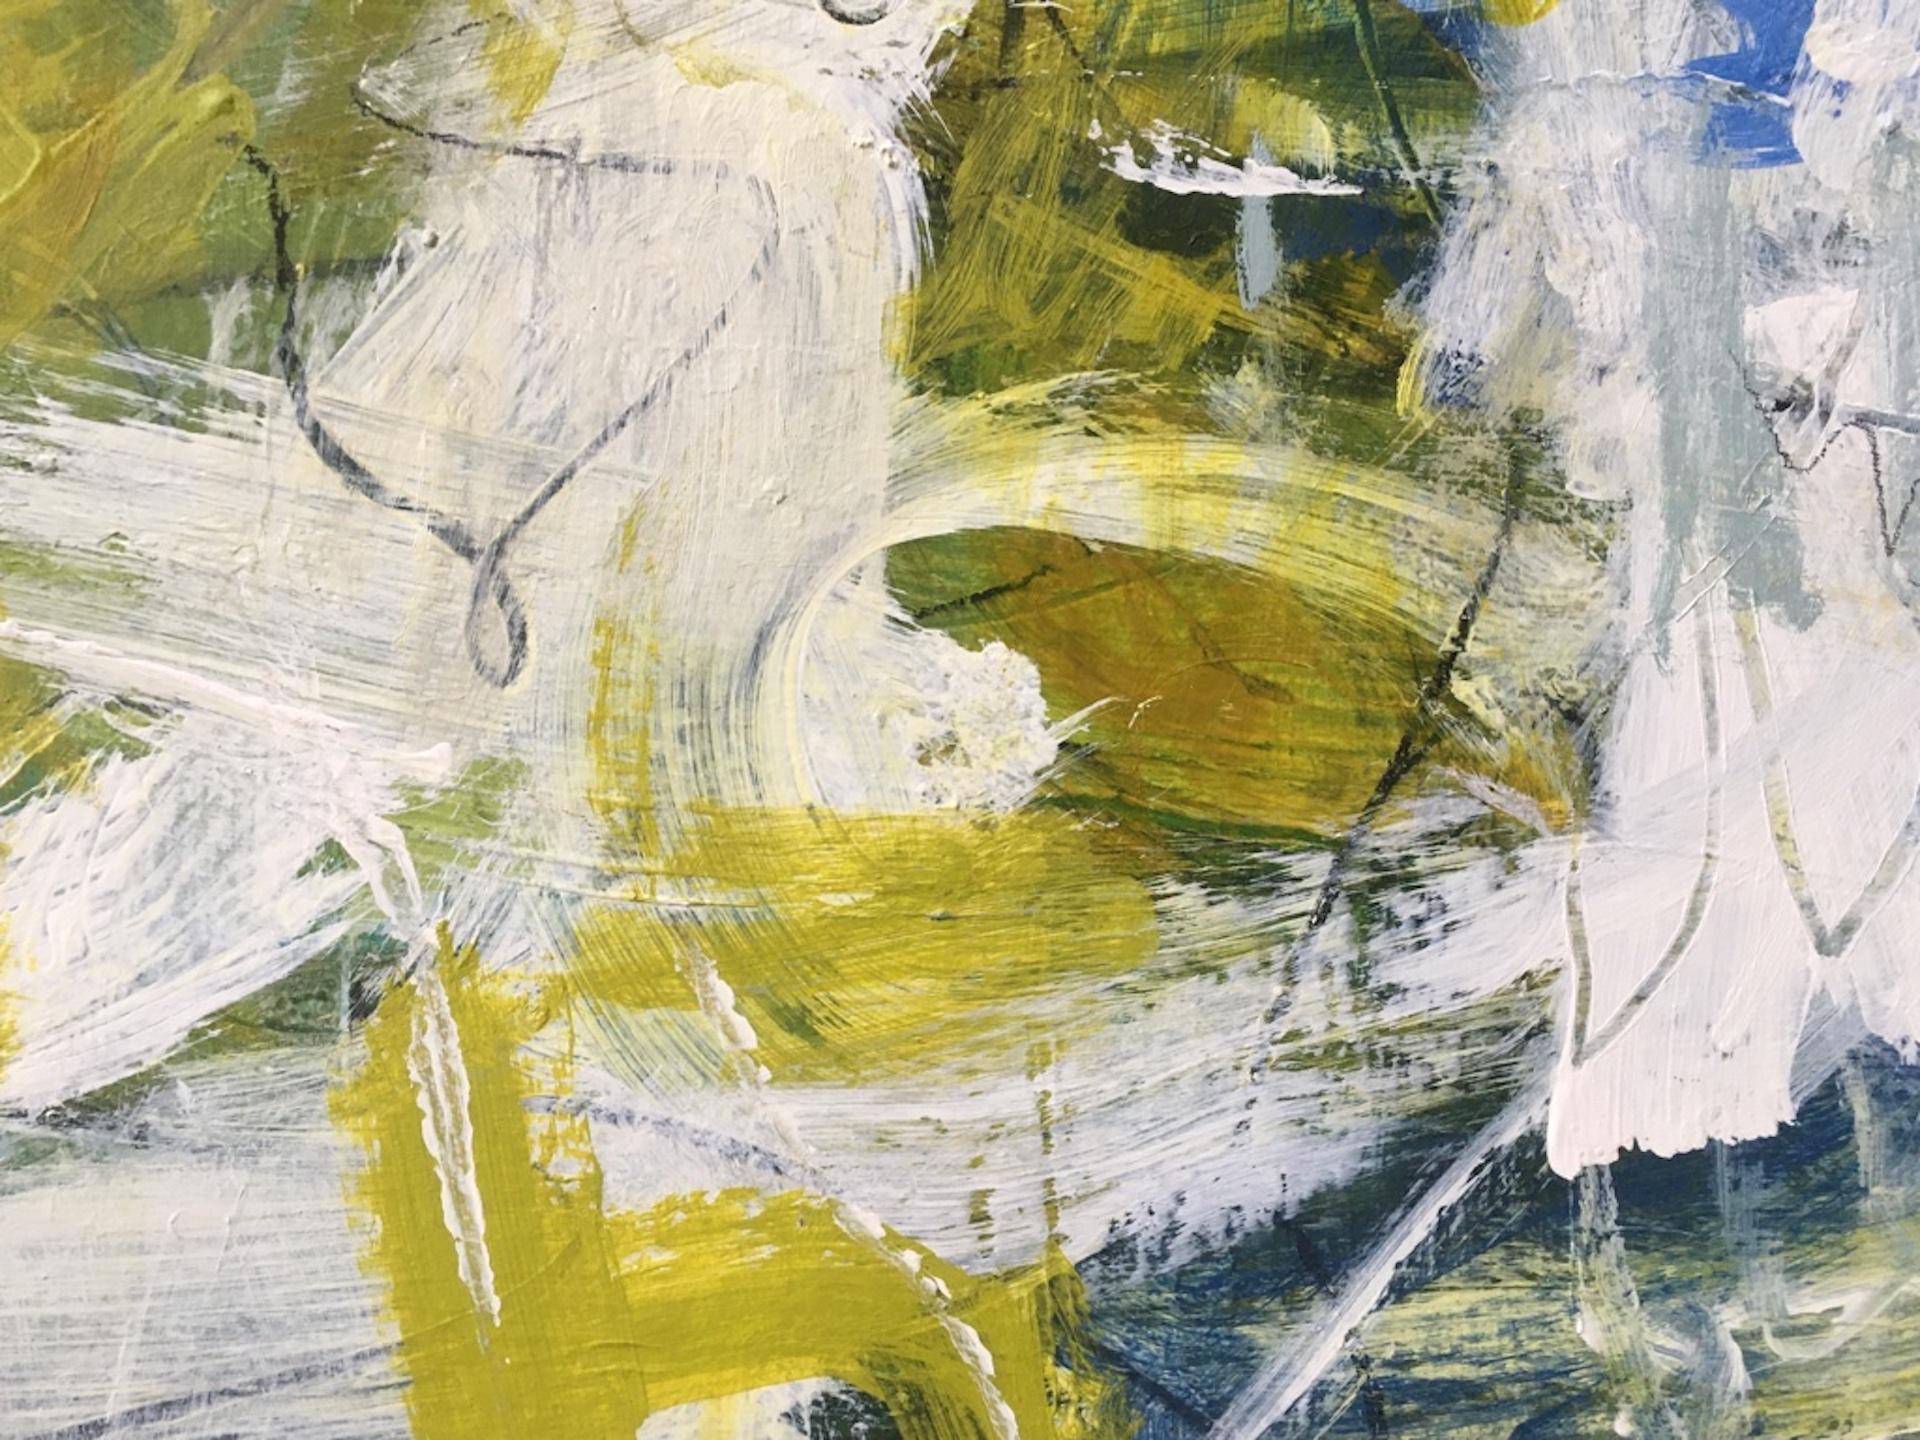 Janet Kieth
Scent of Gorse and Salty Breeze
Original abstract painting on board.
Acrylic paint on board.
Image Size: 51H cm x W76 cm x D 0.30 cm
Sold Unframed
Please note that in situ images are purely an indication of how a piece may look.

Scent